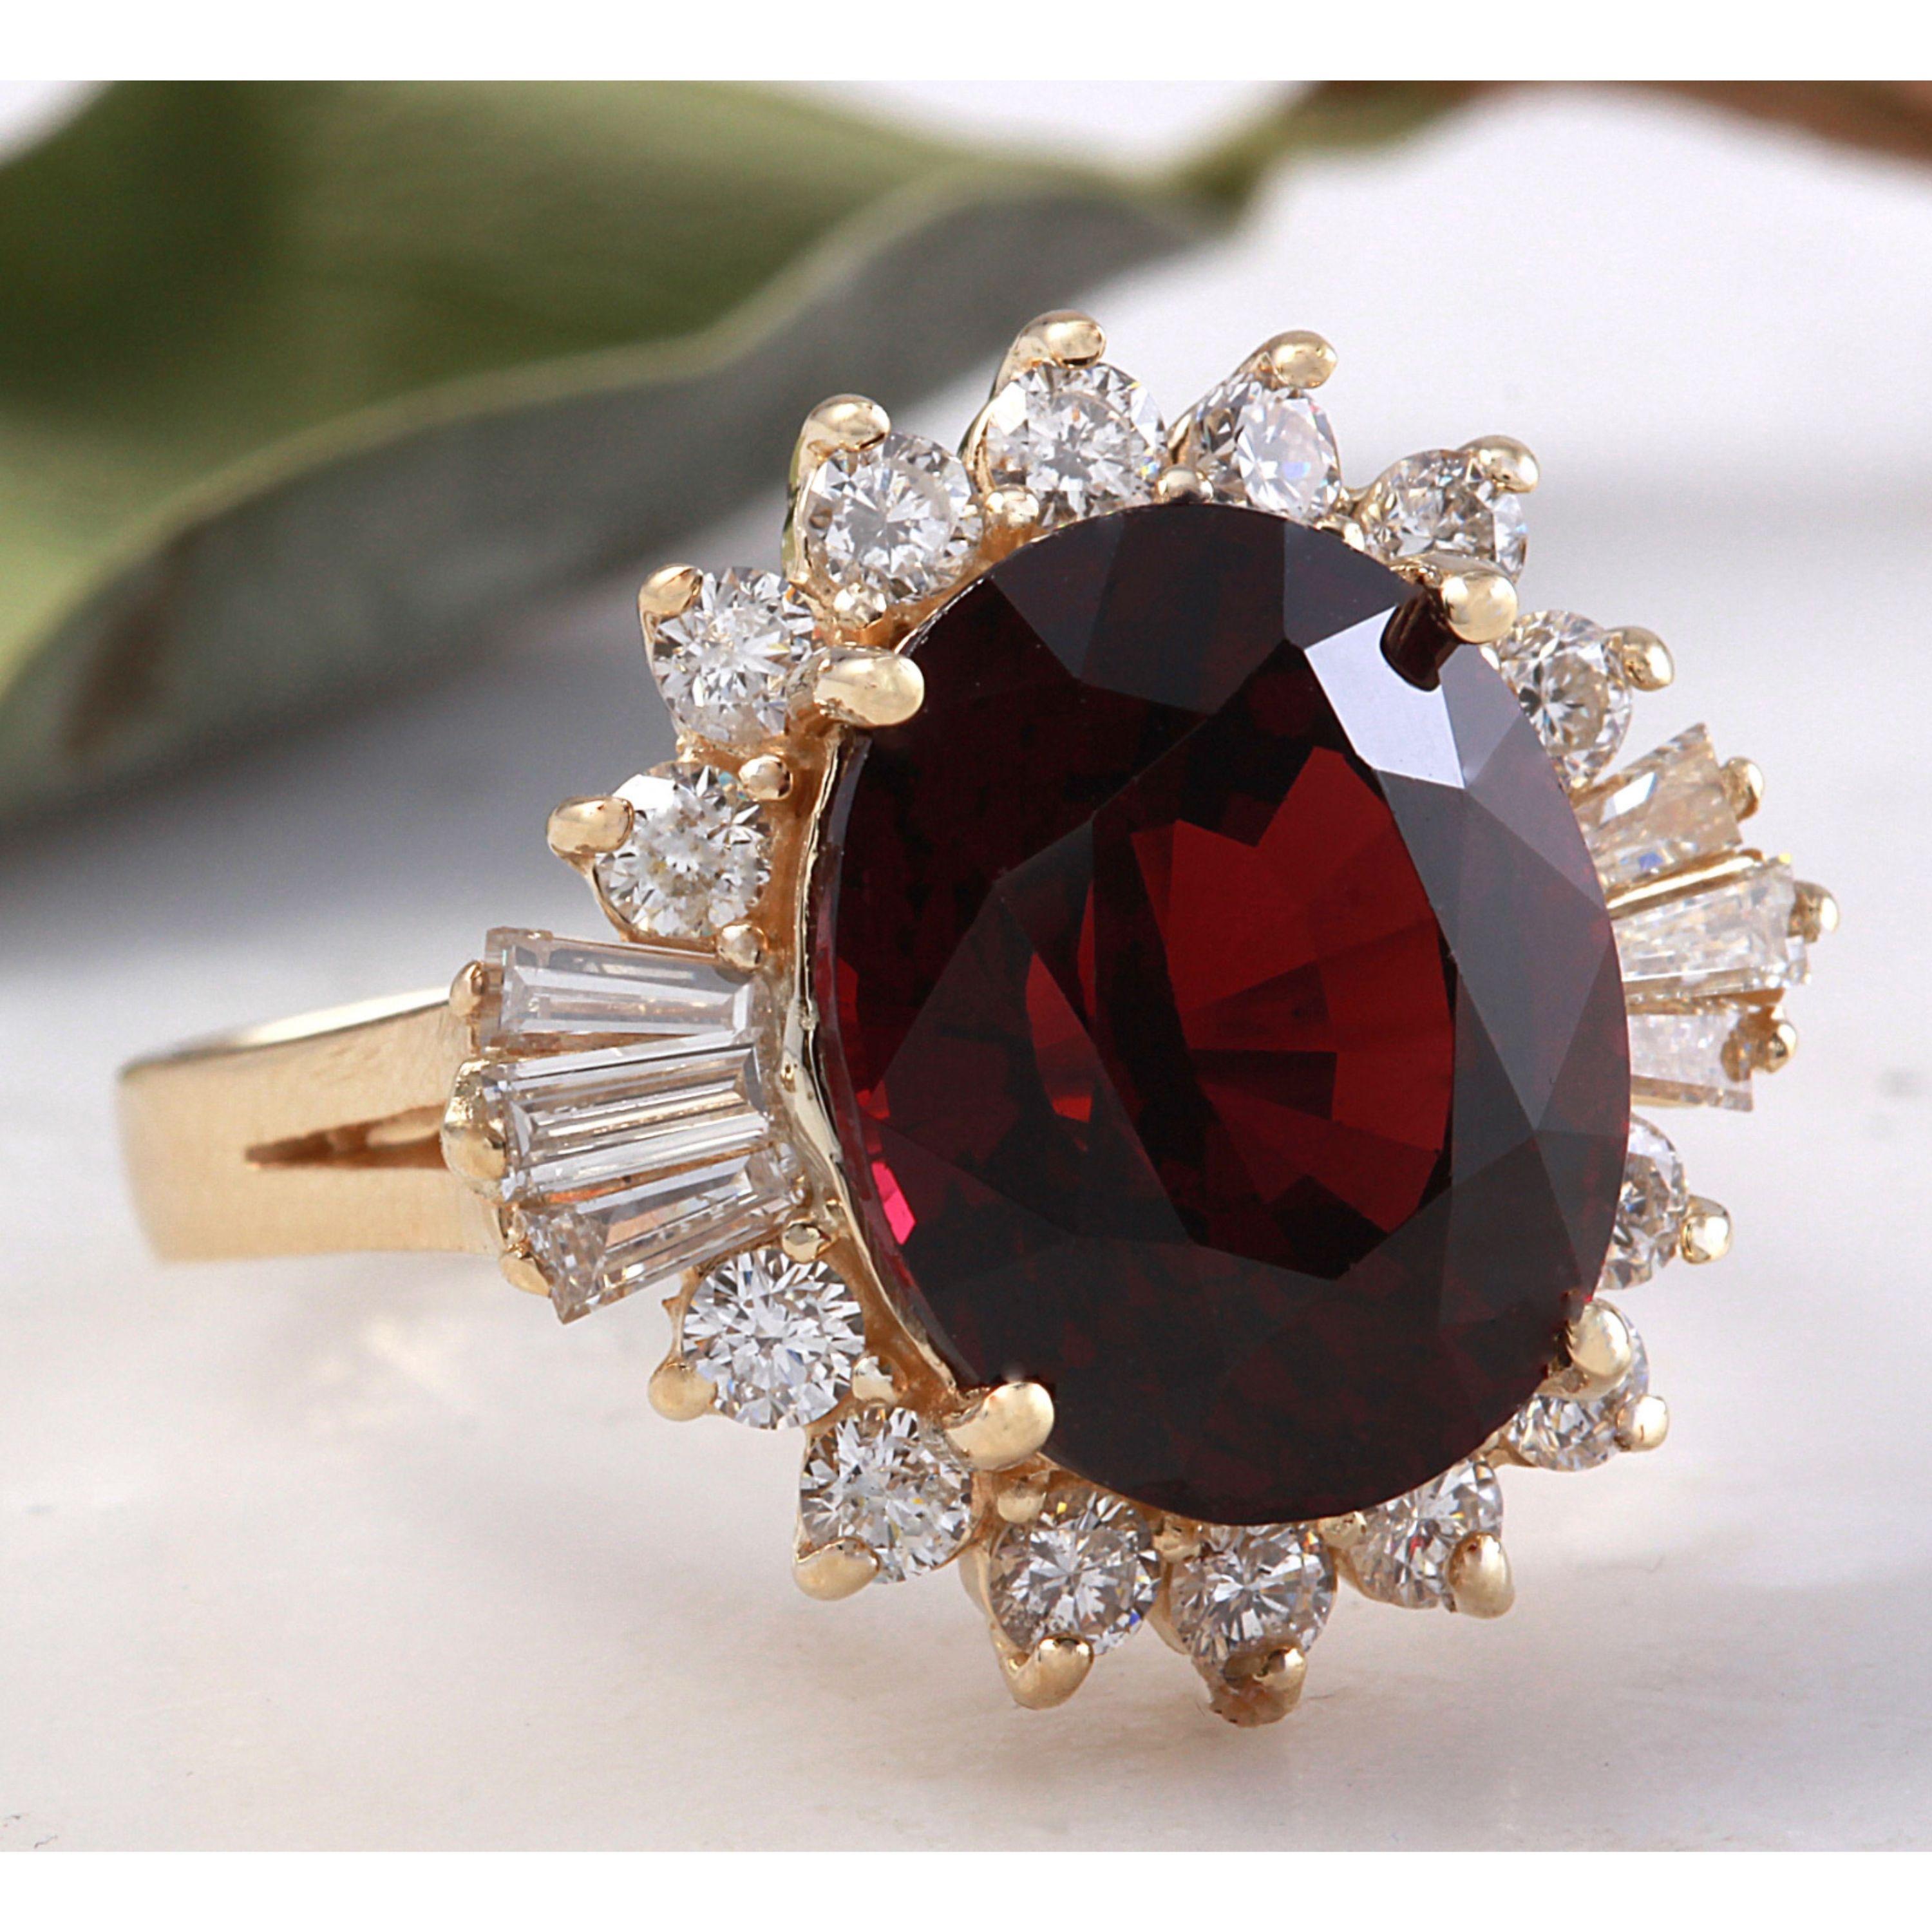 10.10 Carats Impressive Red Garnet and Natural Diamond 14K Yellow Gold Ring

Total Natural Oval Red Garnet Weight is: Approx. 9.00 Carats

Garnet Measures: Approx. 14.00 x 12.00mm

Natural Round & Baguette Diamonds Weight: Approx. 1.10 Carats (color